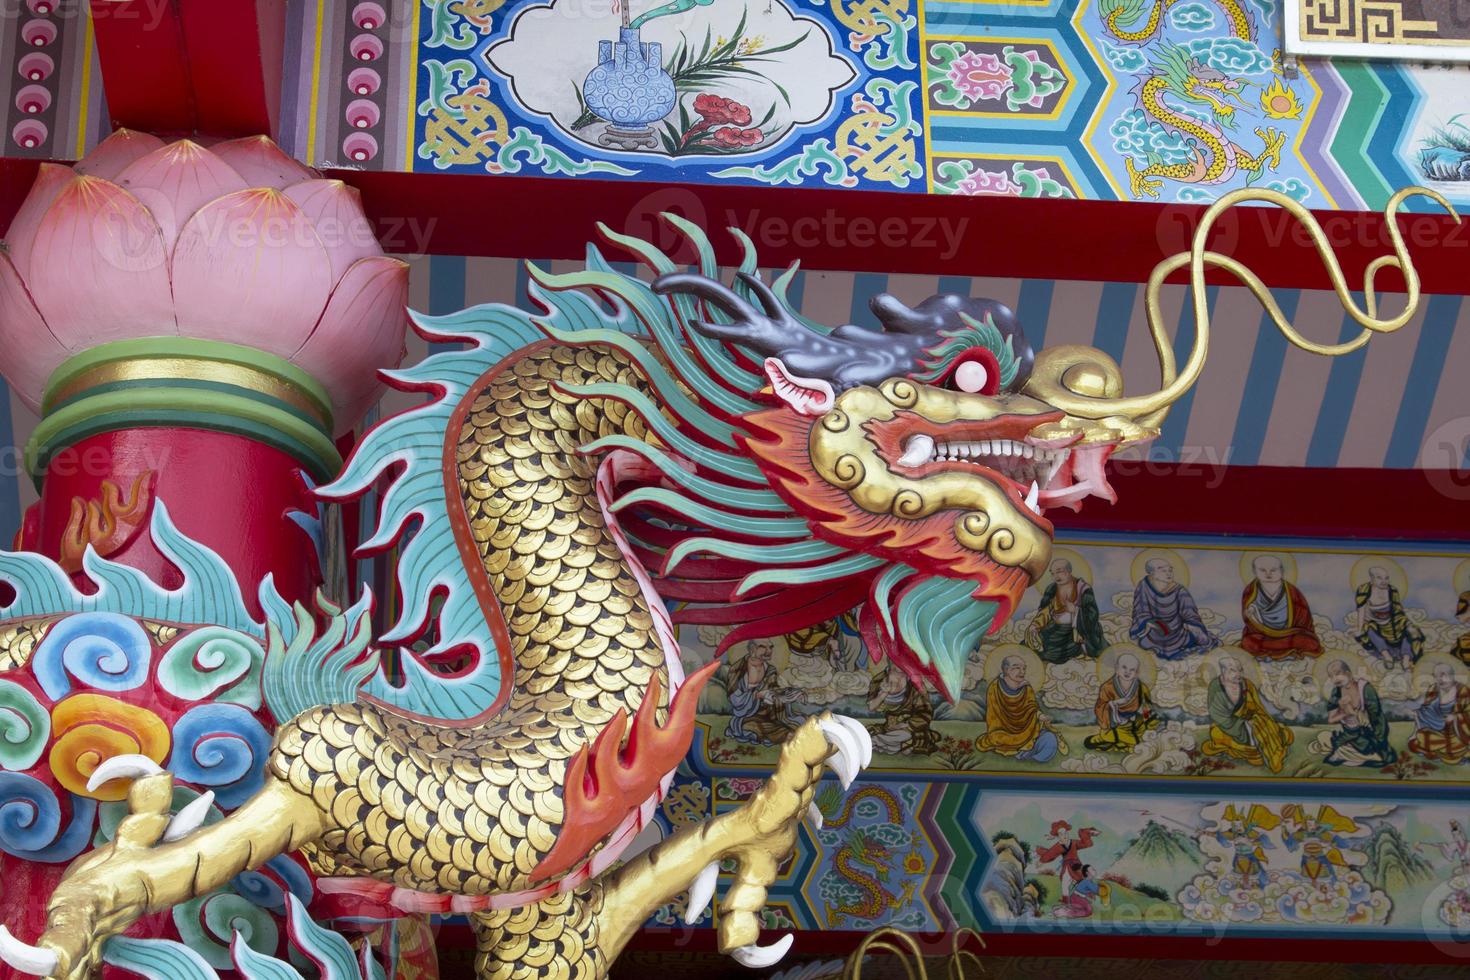 Dragon statues, a mythical creature in Chinese literature, are often decorated in temples and on the roof as beautiful sculptures and blue skies. photo